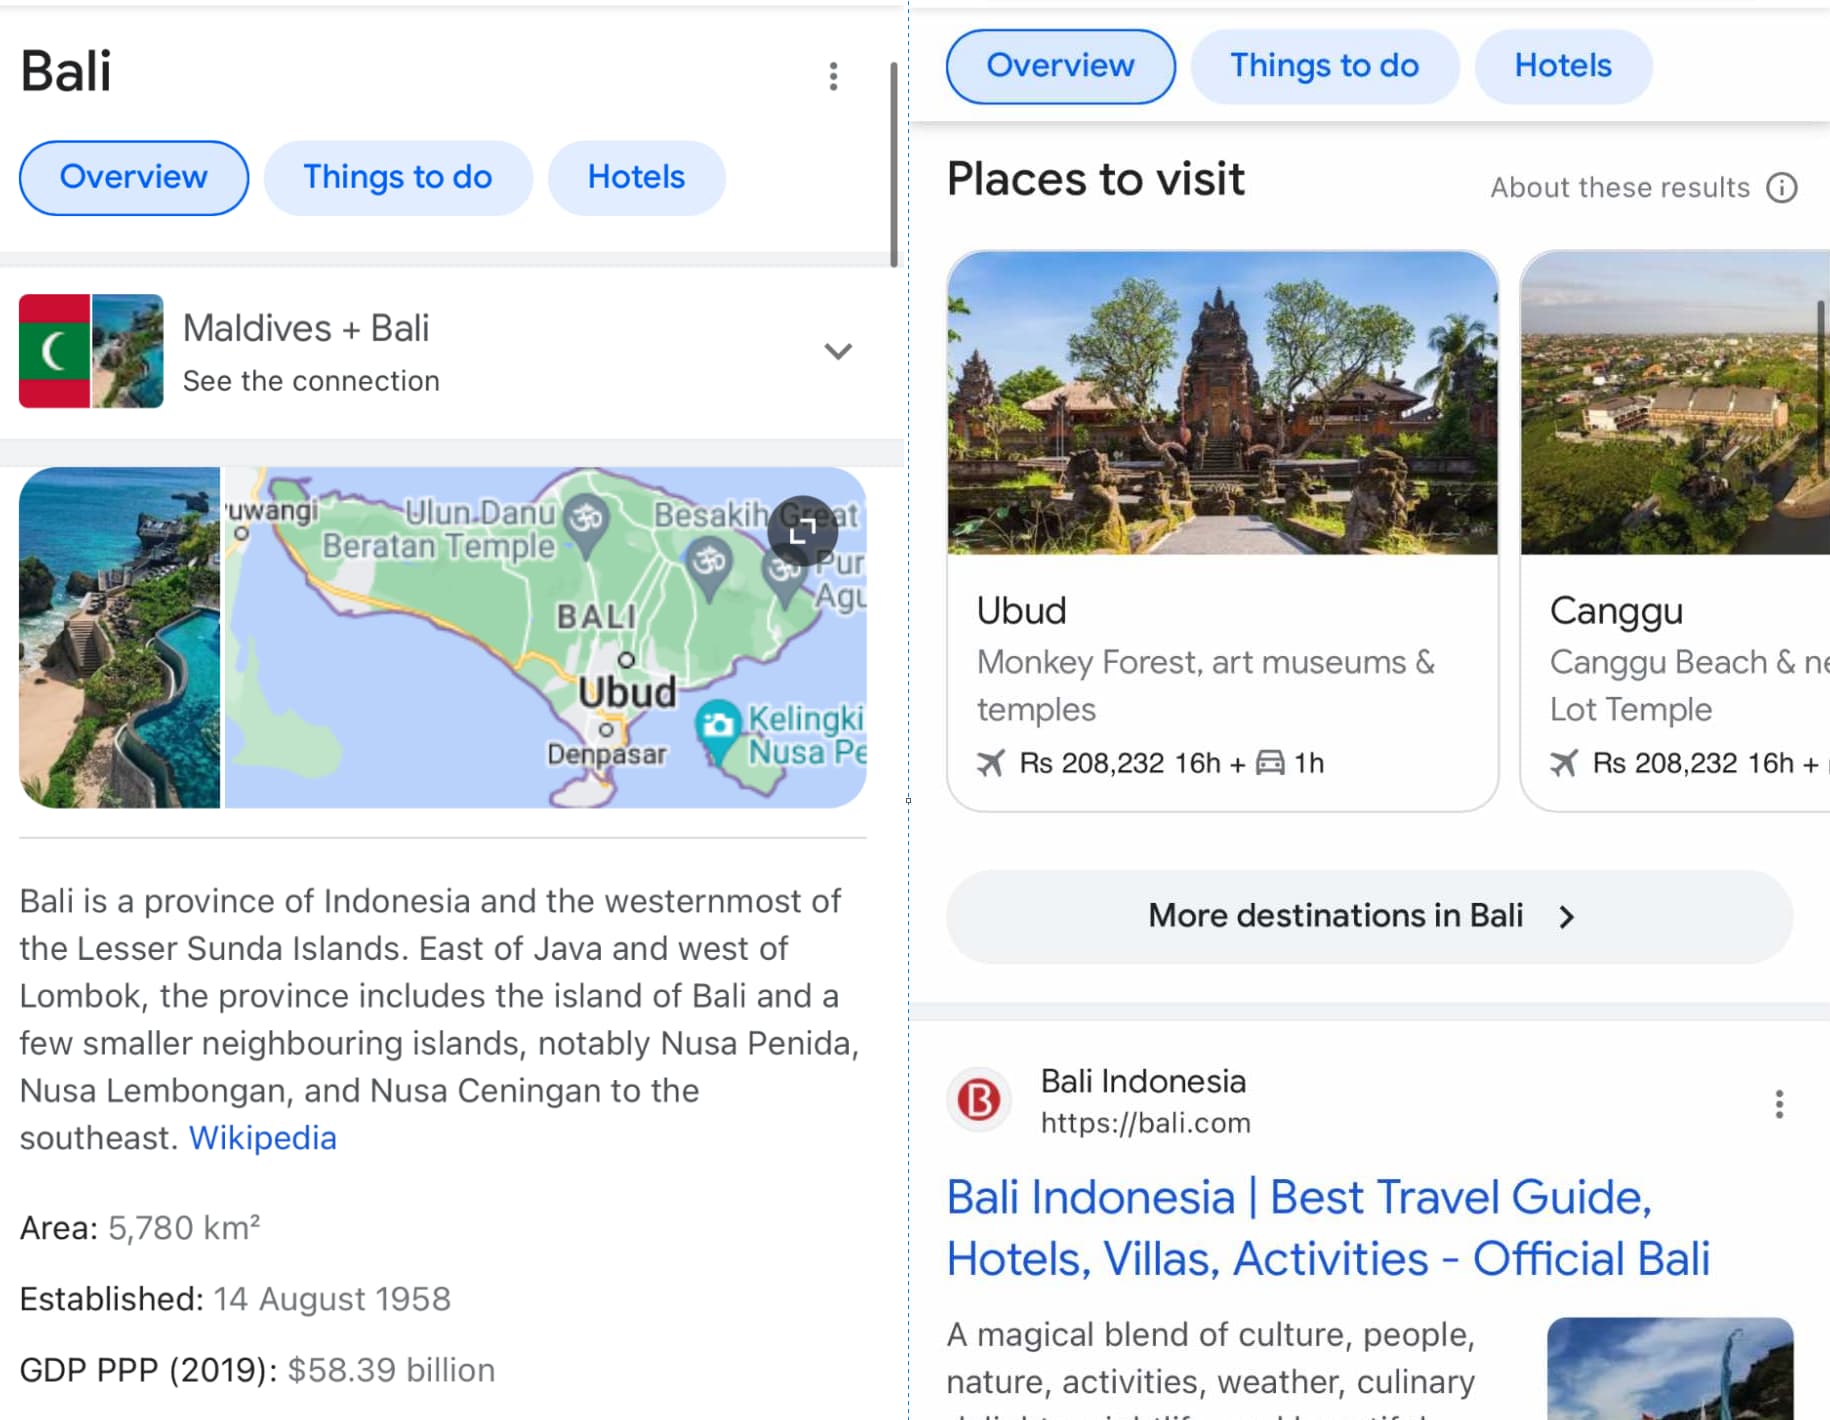 SEO trends, image SEO - images on SERP search for “Bali.”